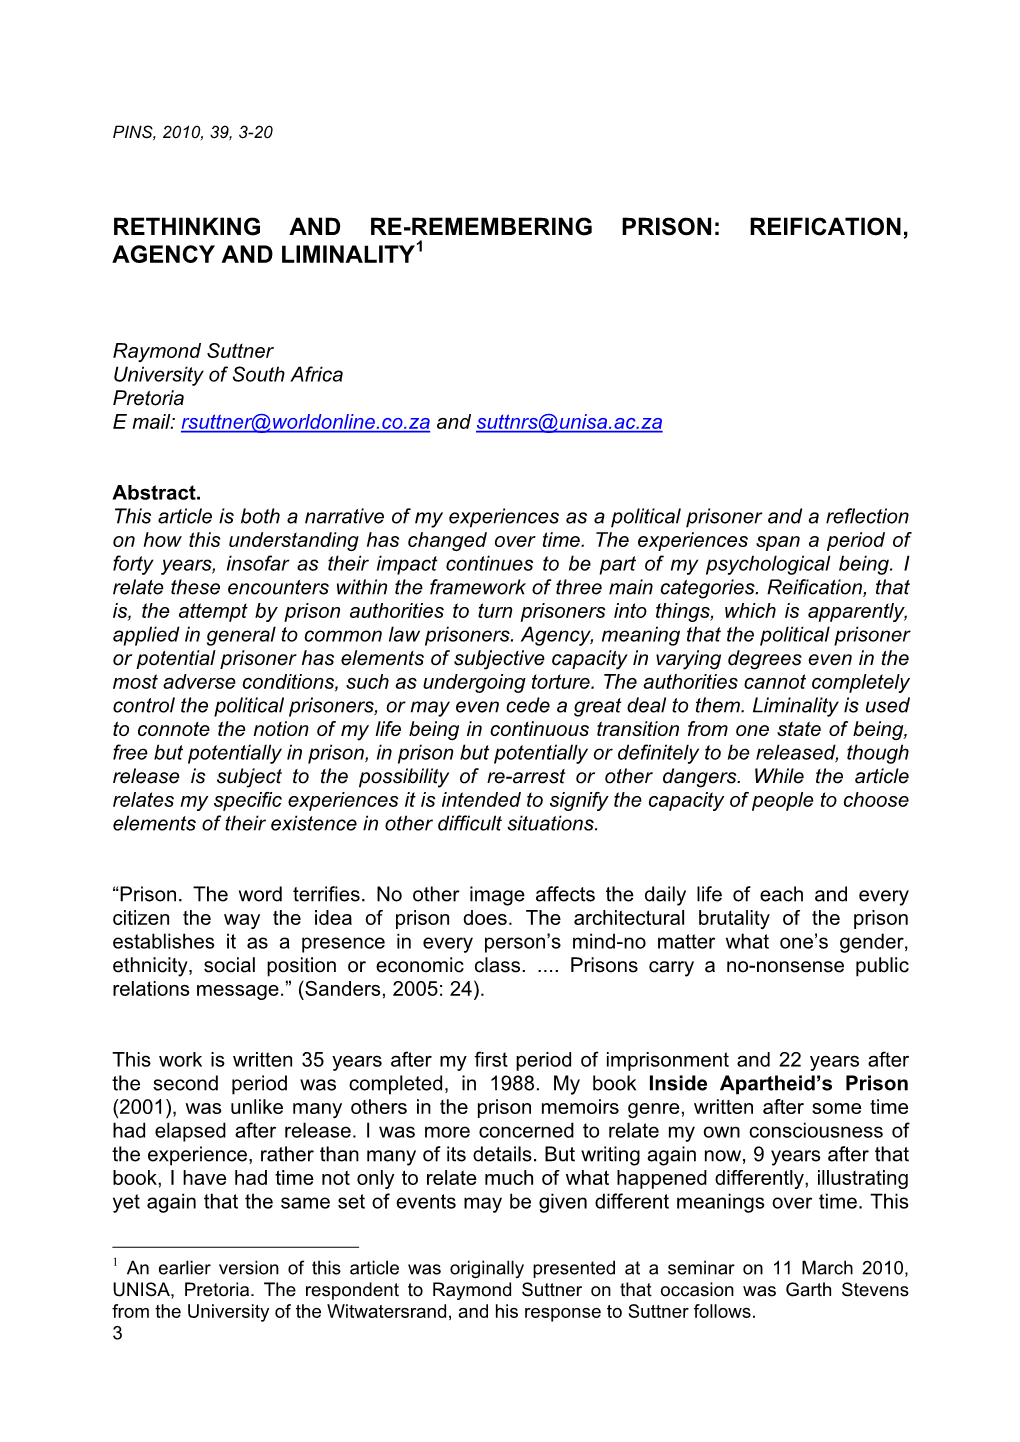 Rethinking and Re-Remembering Prison: Reification, Agency and Liminality1